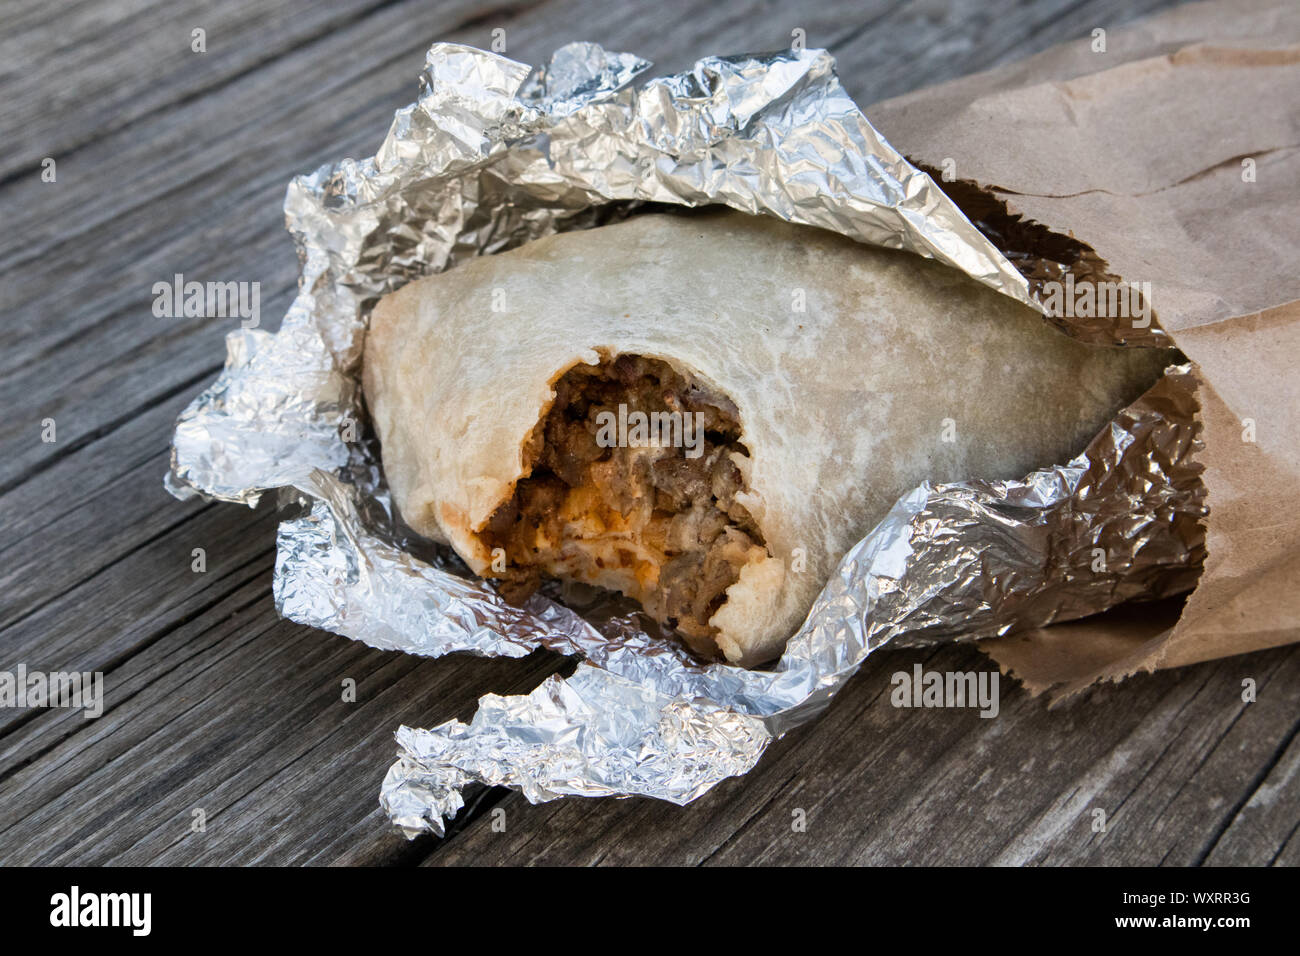 Carne Asada Burrito Wrapped in Foil Open and Paper Bag on Table Stock Photo